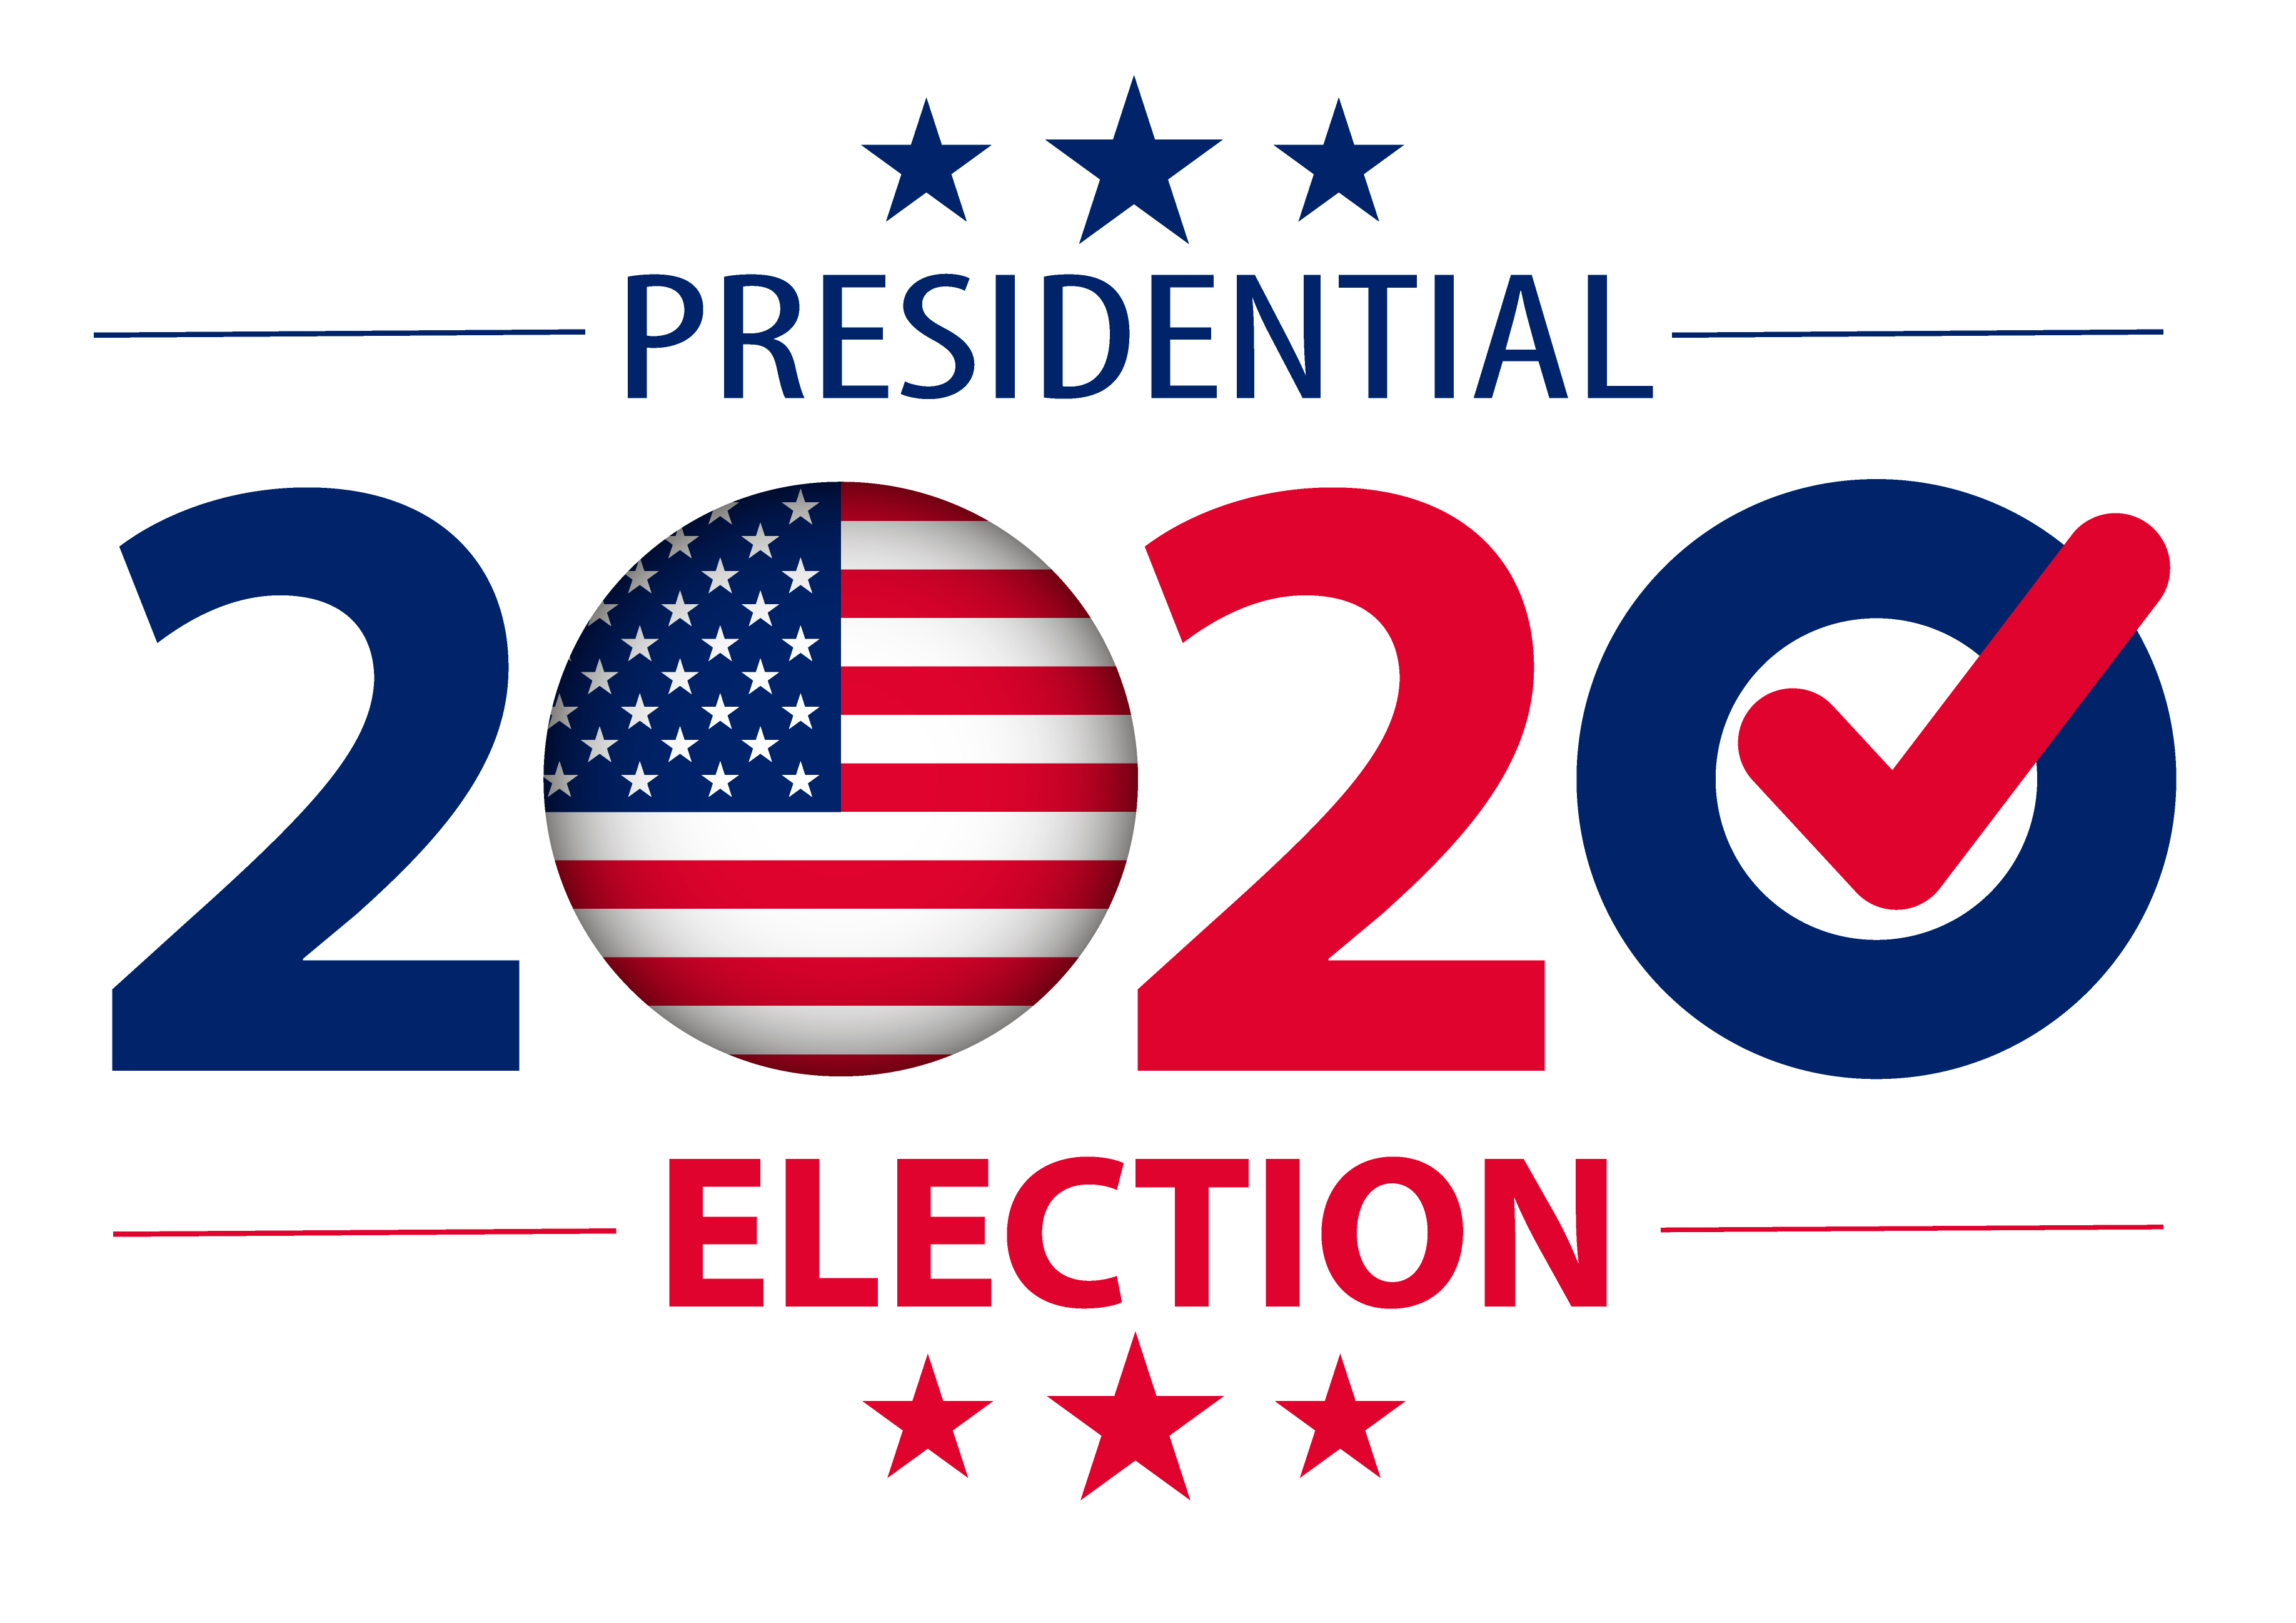 graphic image simulating a bumper sticker reads "2020 presidential election"